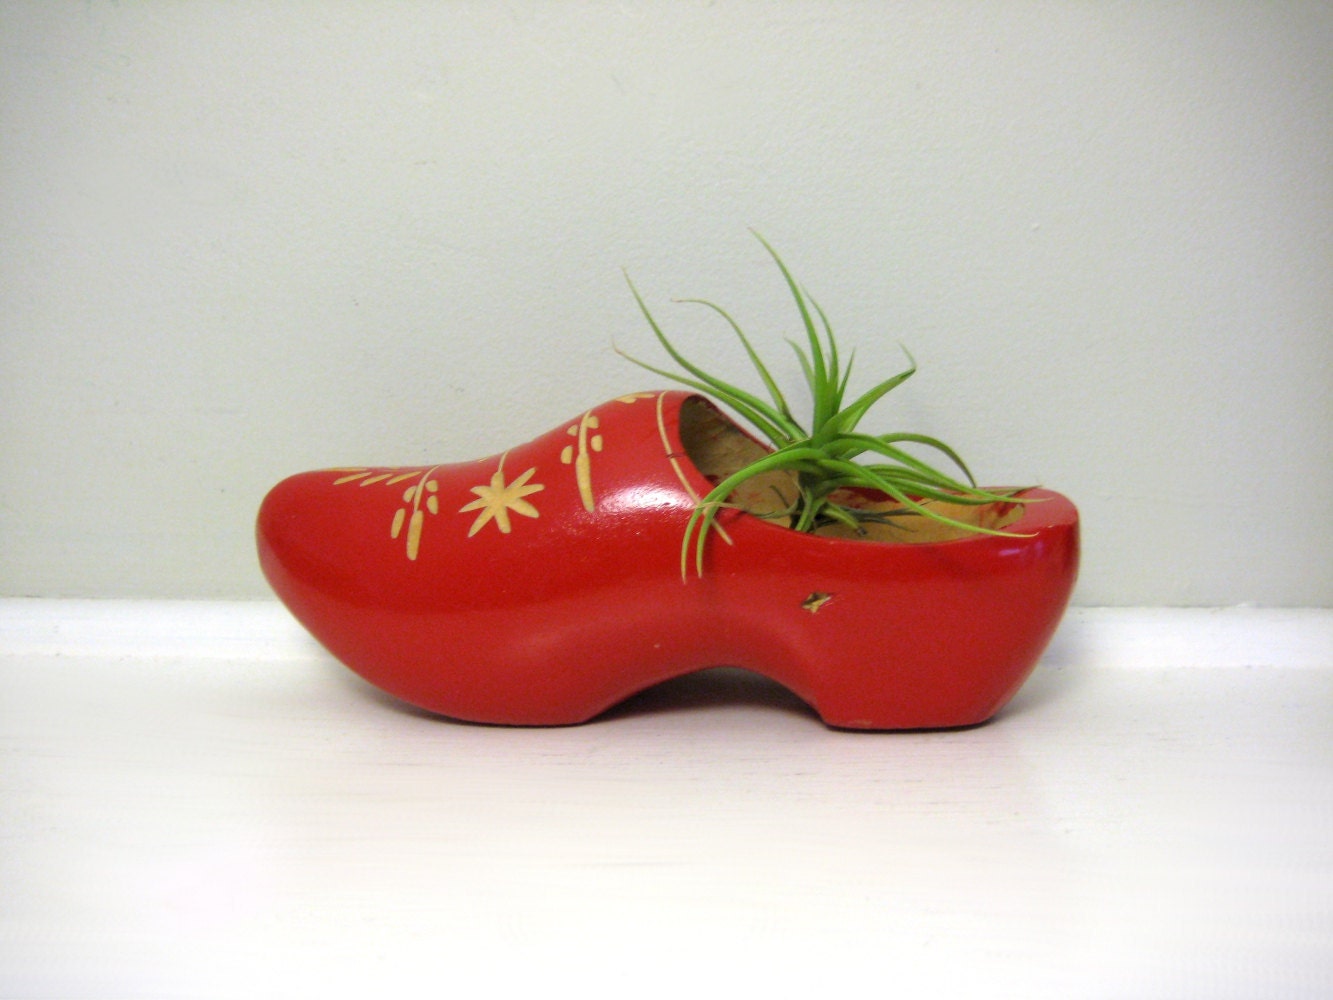 Vintage Red Dutch Wooden Shoe, Air Plant Display Container, Bright Red Travel Souvenir, Carved Wood Clog, Trinket Dish